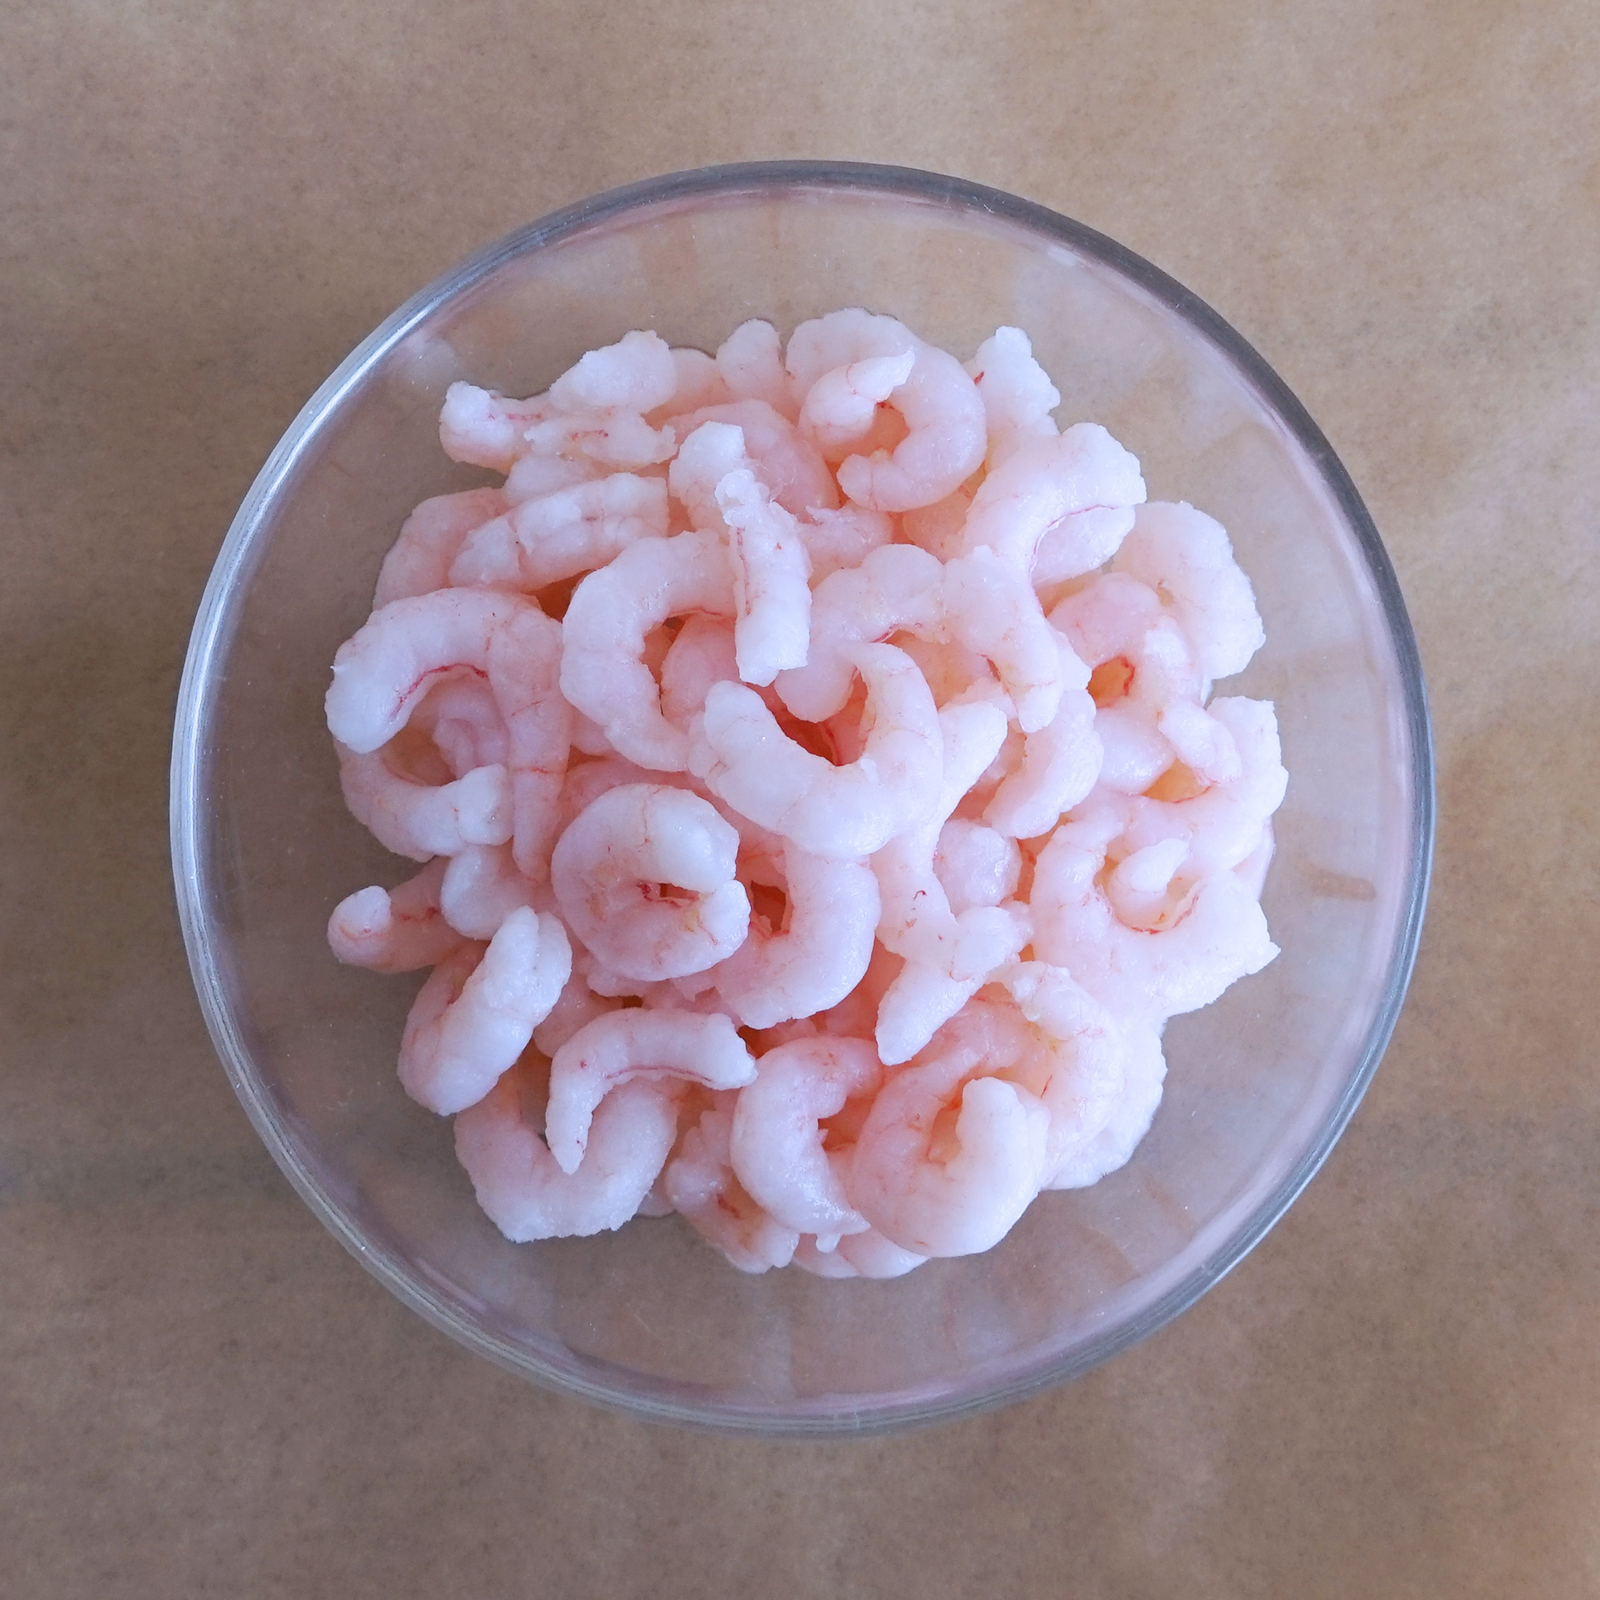  no addition preservation charge un- use freezing natural northern shrimp ... Boyle ending under processing un- necessary 454g approximately 250~350 pcs entering less guarantee water freezing .. high quality sea . ho kok red shrimp heat cooking ending 